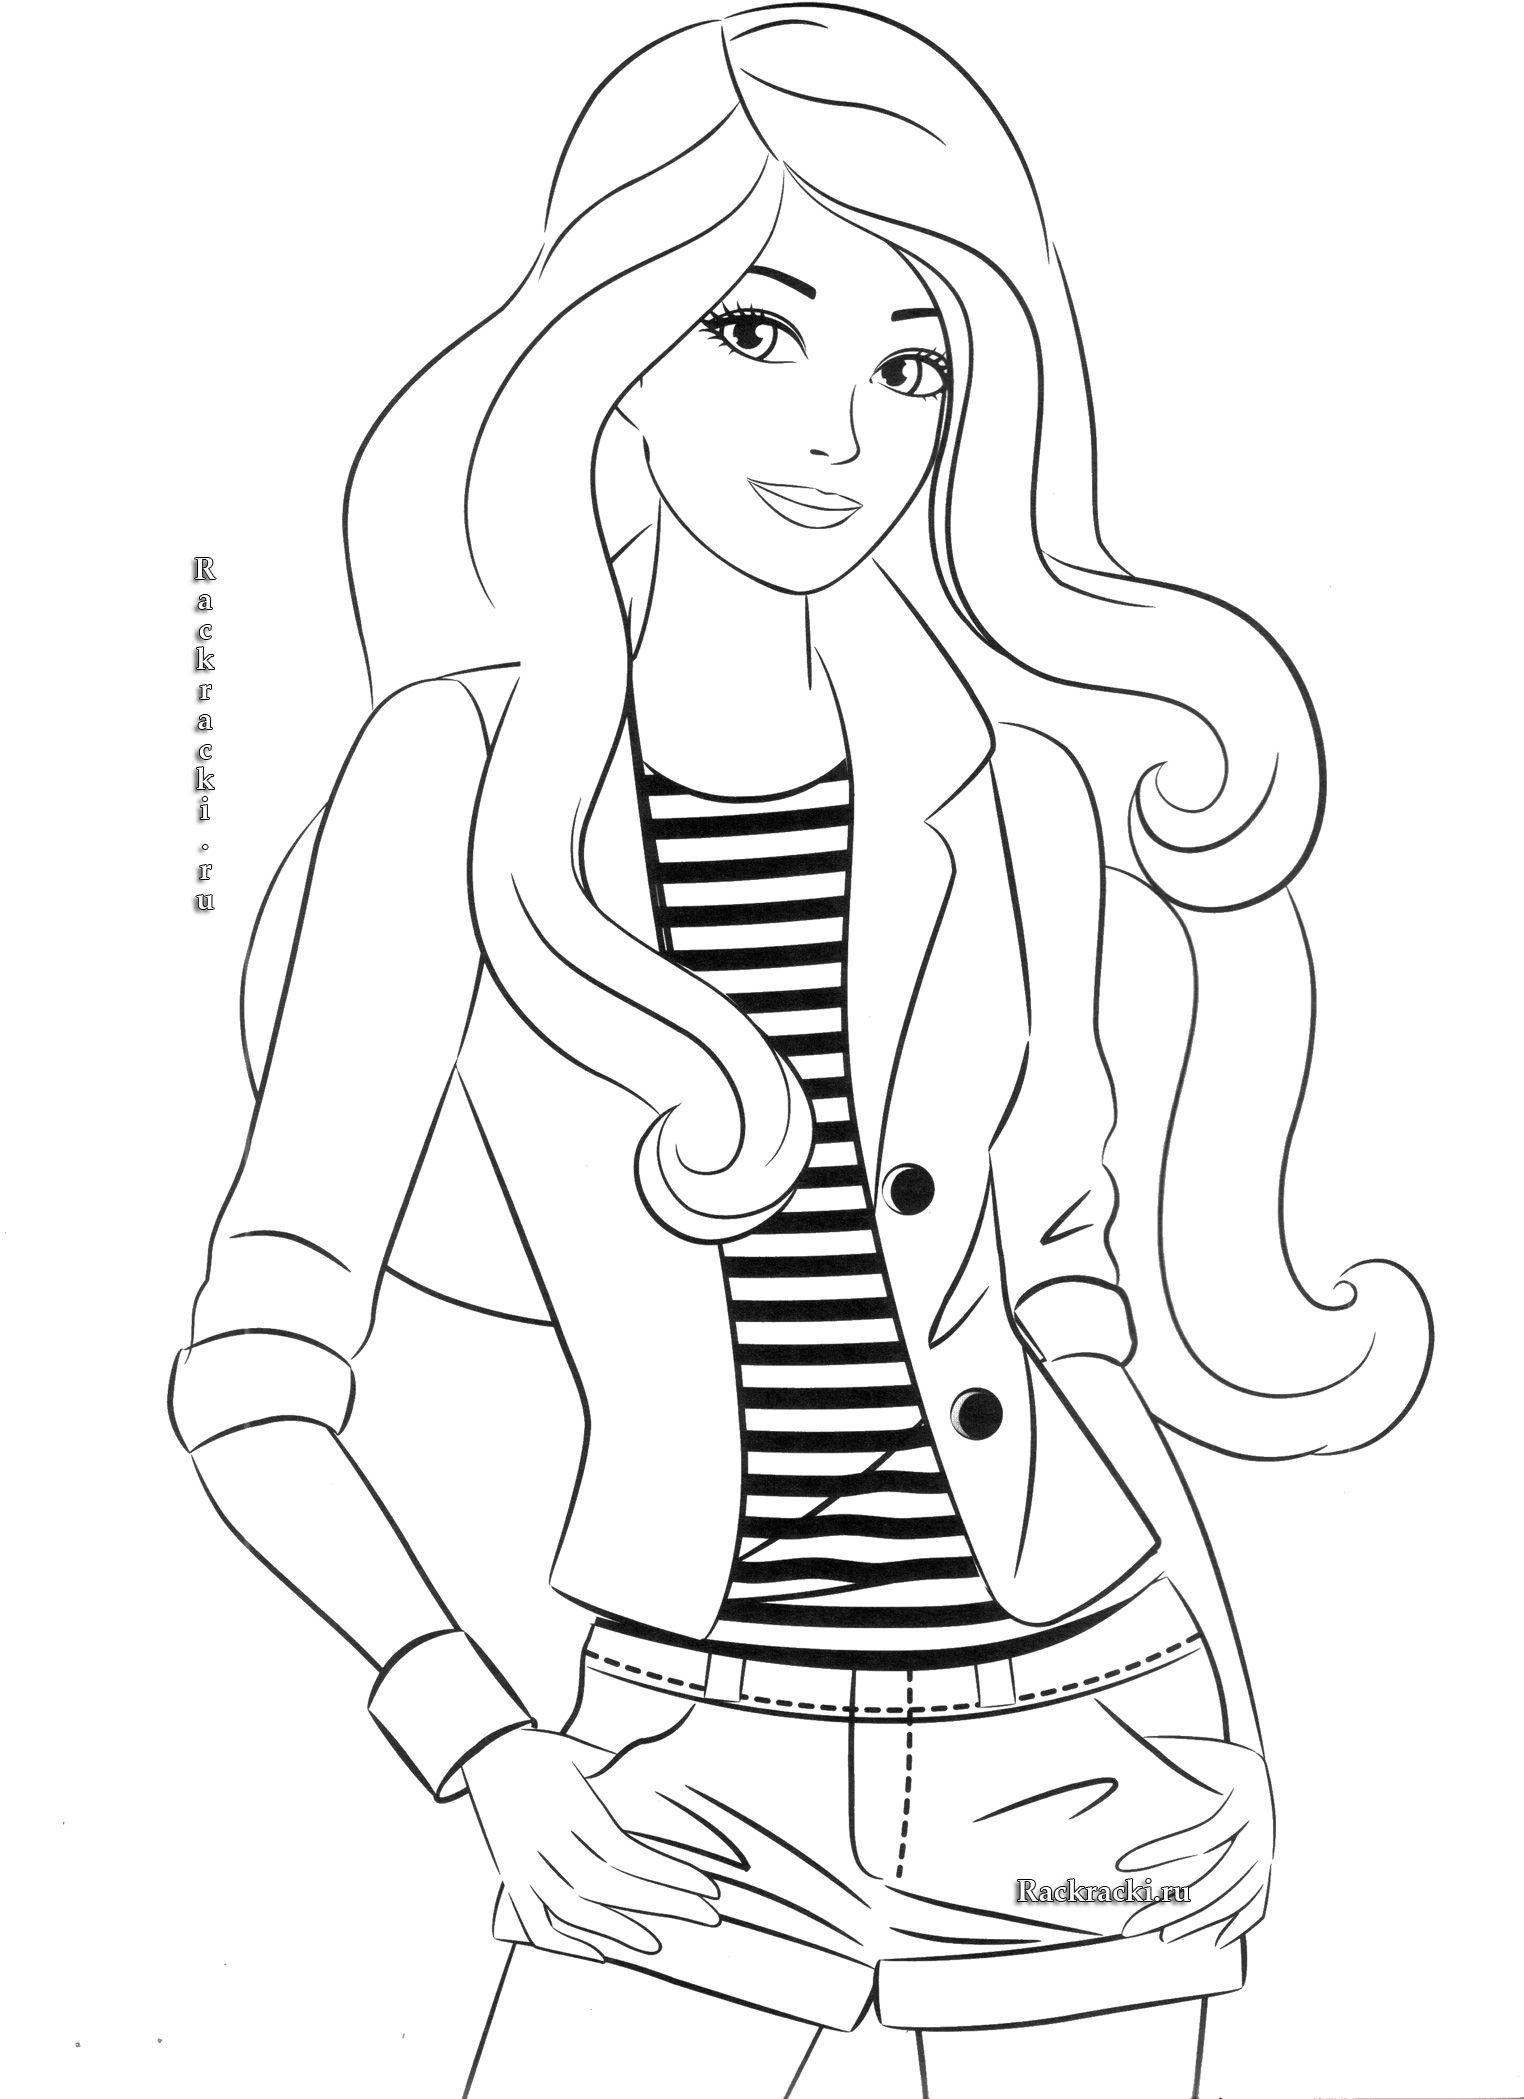 Coloring Pages For Kids Barbie
 Pin by Alice johnson on coloring pages to print